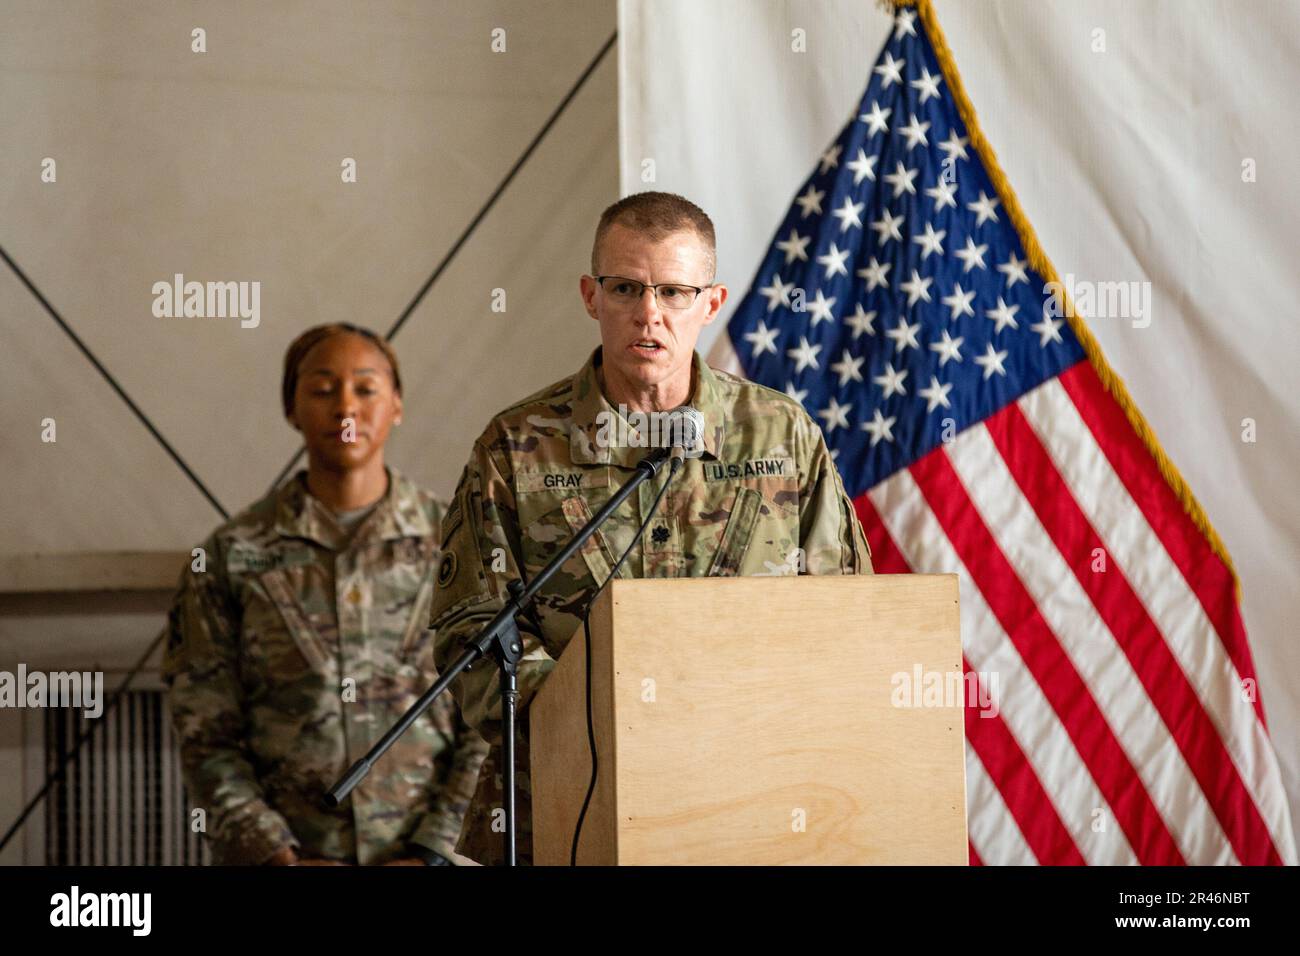 U.S. Army Lt. Col. Lewis Gray, the commander of the 336th Combat Sustainment Support Battalion, speaks to the attendees during a ceremony in which the 336th CSSB transferred authority to the 382nd CSSB. Standing behind him was Maj. Ciera Earley, the executive officer of the battalion. These battalions are subordinate to the 369th Sustainment Brigade while forward deployed to the CENTCOM area of operations. Stock Photo